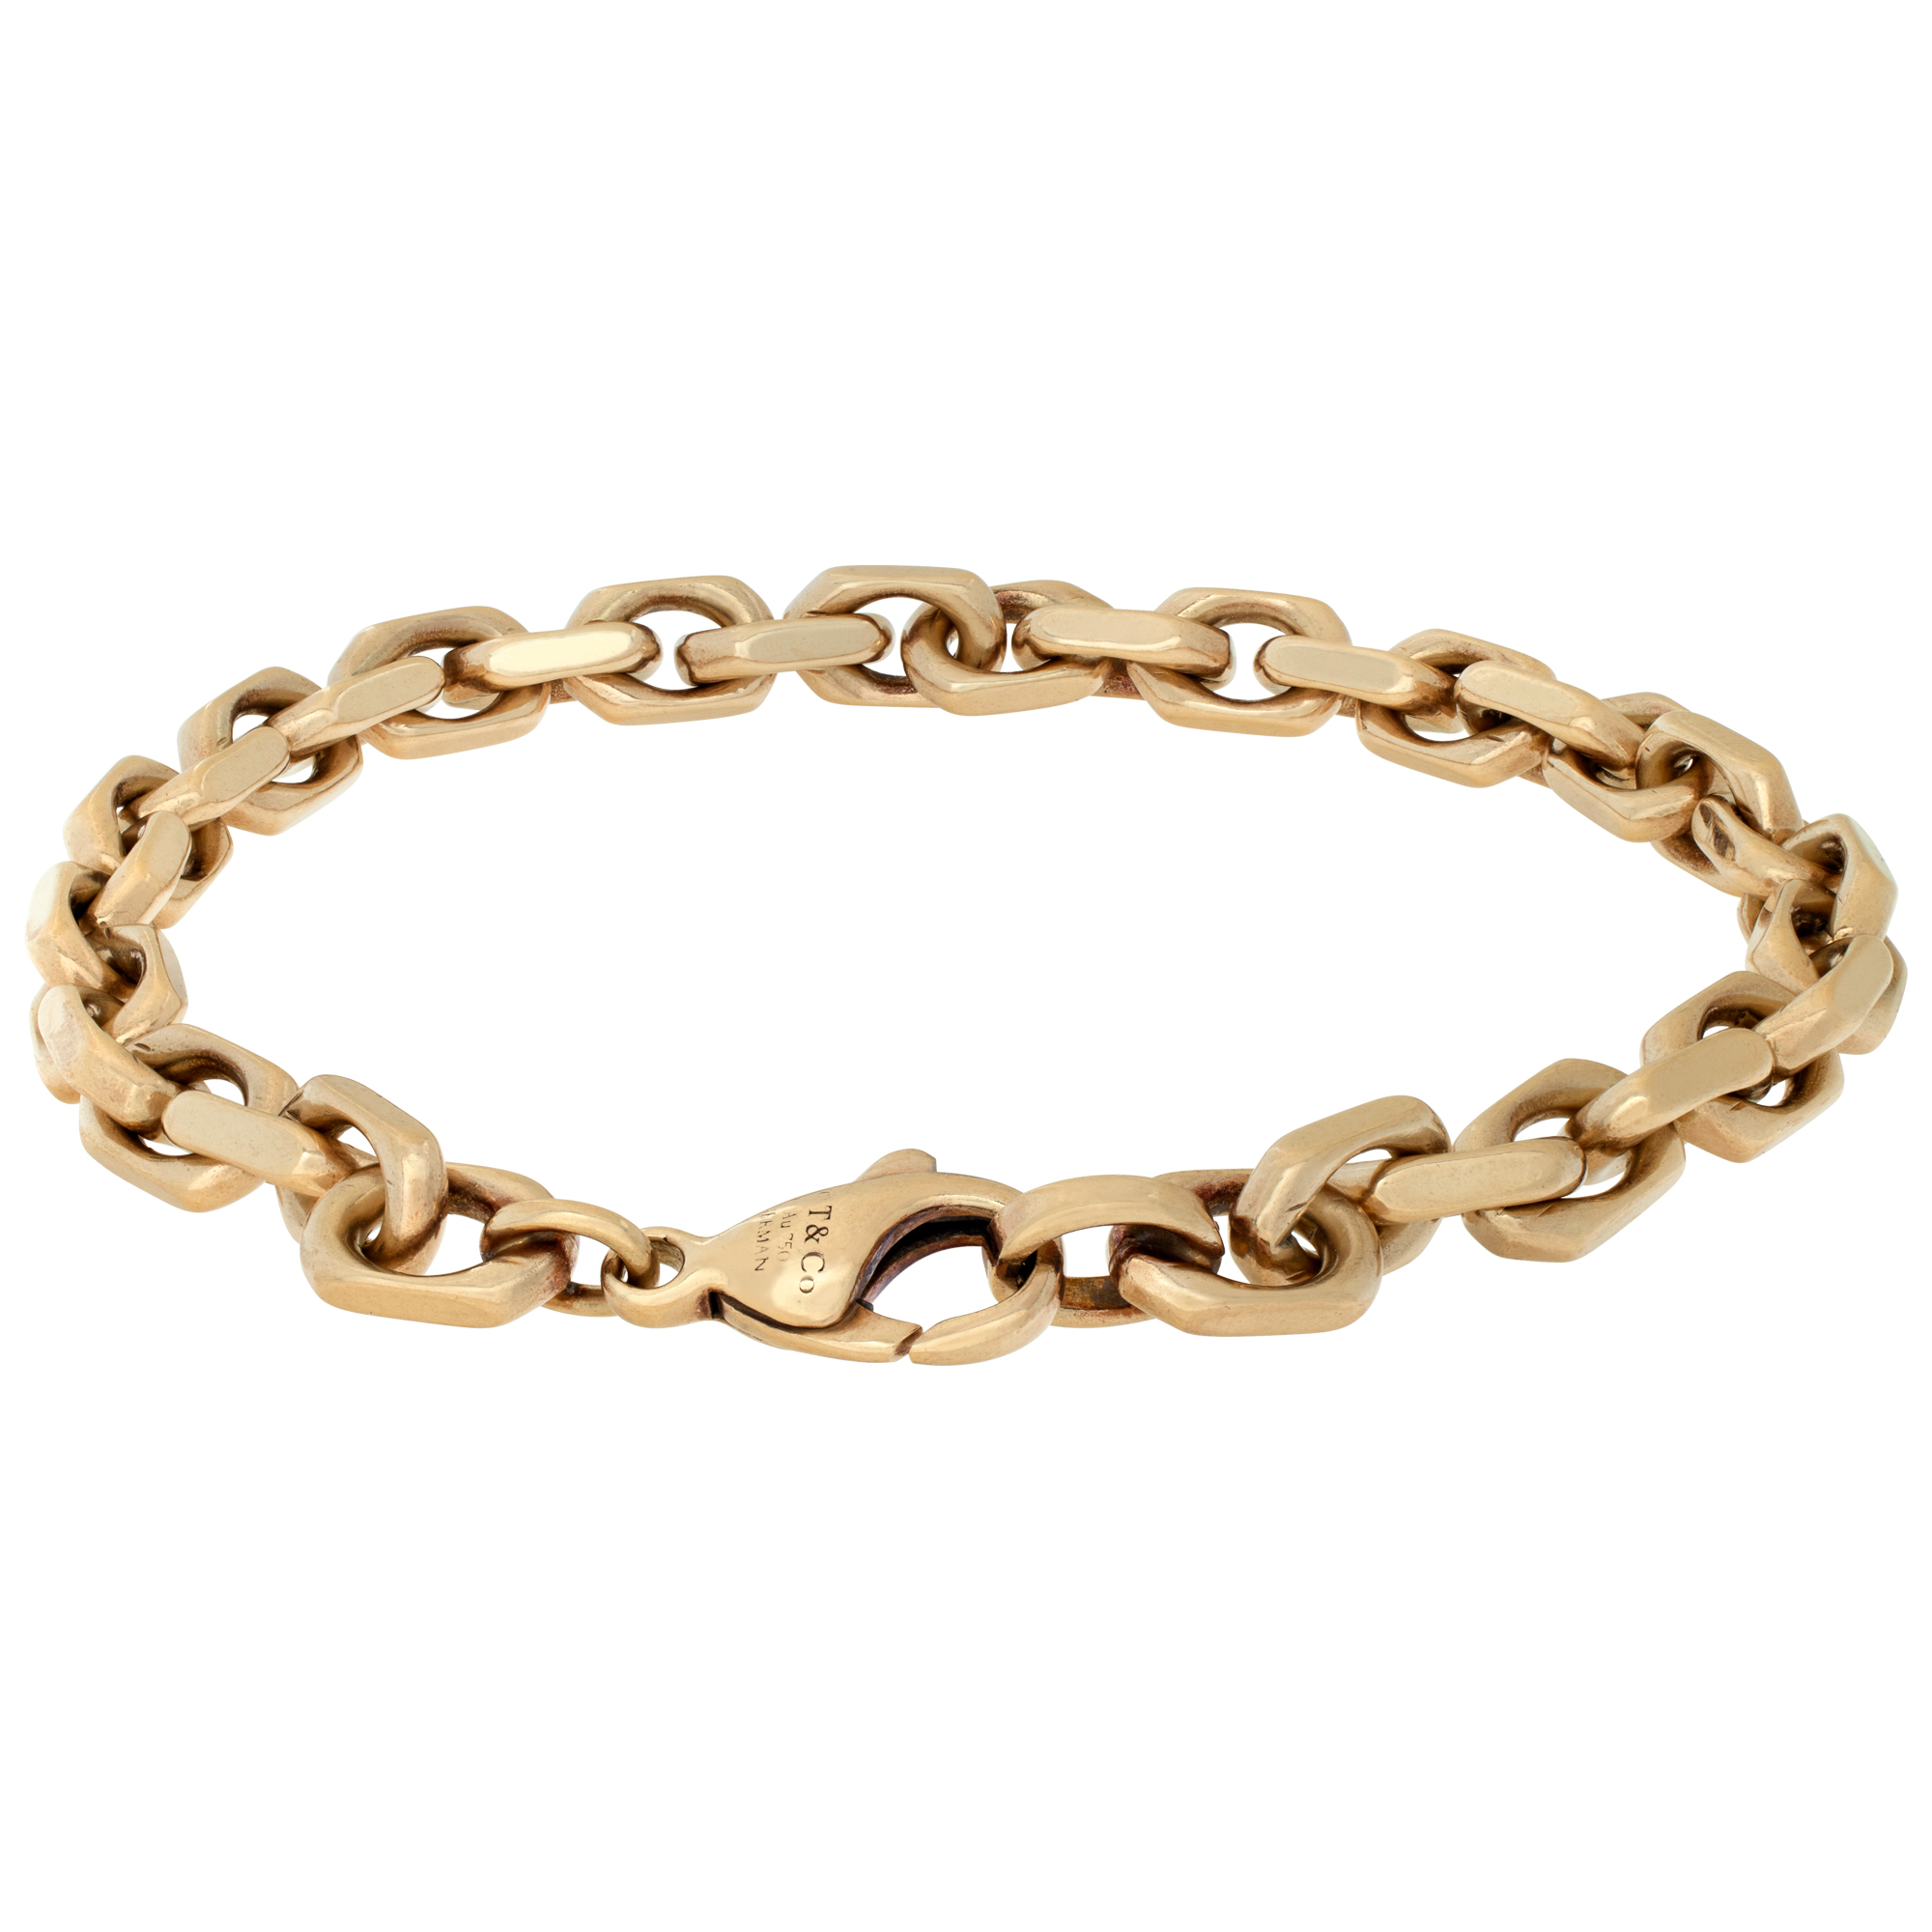 Tiffany and Co. link bracelet in 18k yellow gold. Measures 8.25 inches. image 4